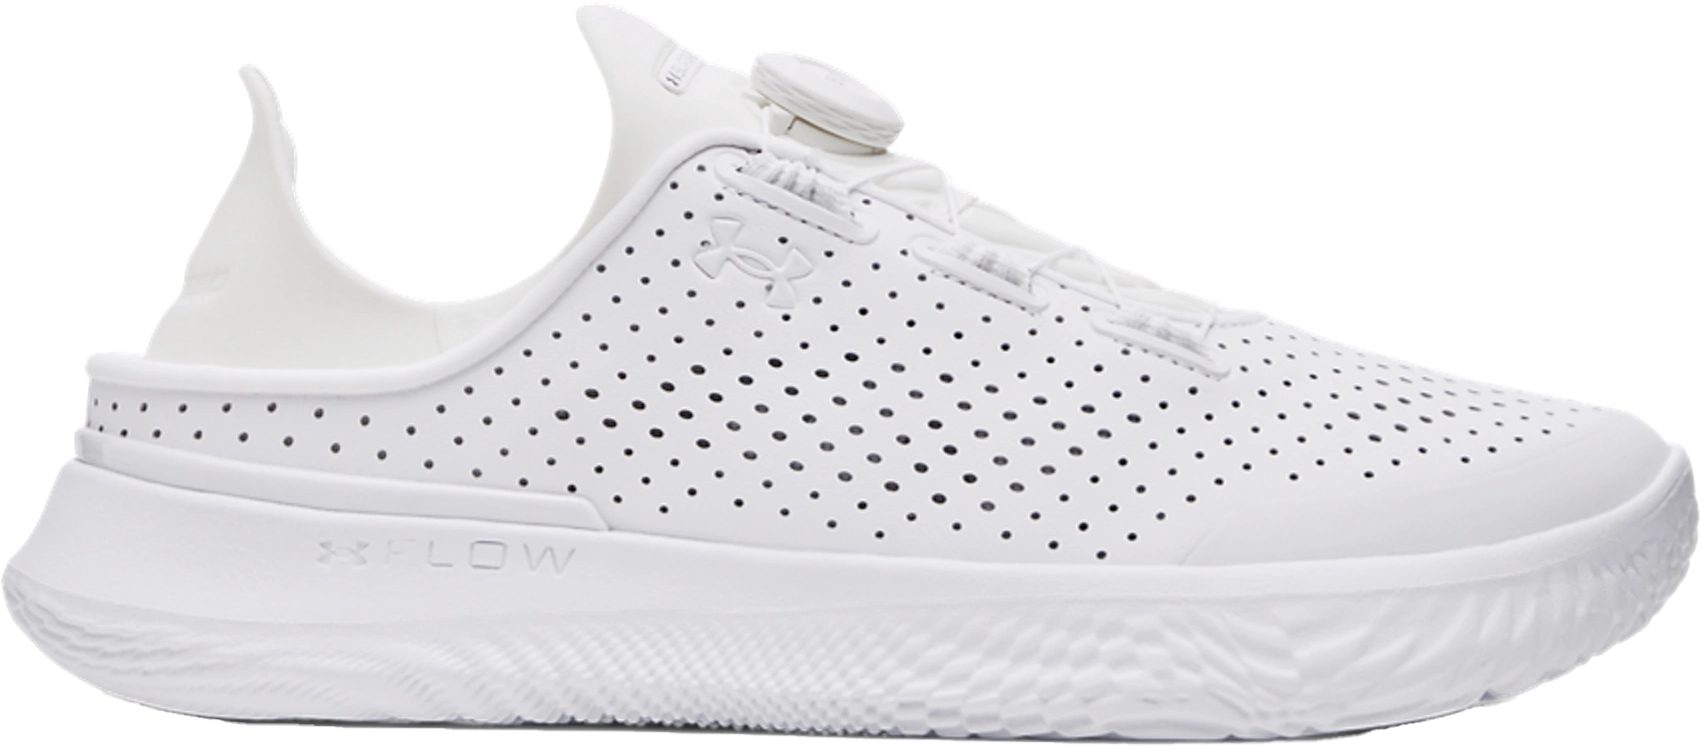 Sapatilhas de fitness Under Armour UA Slipspeed Trainer SYN-WHT